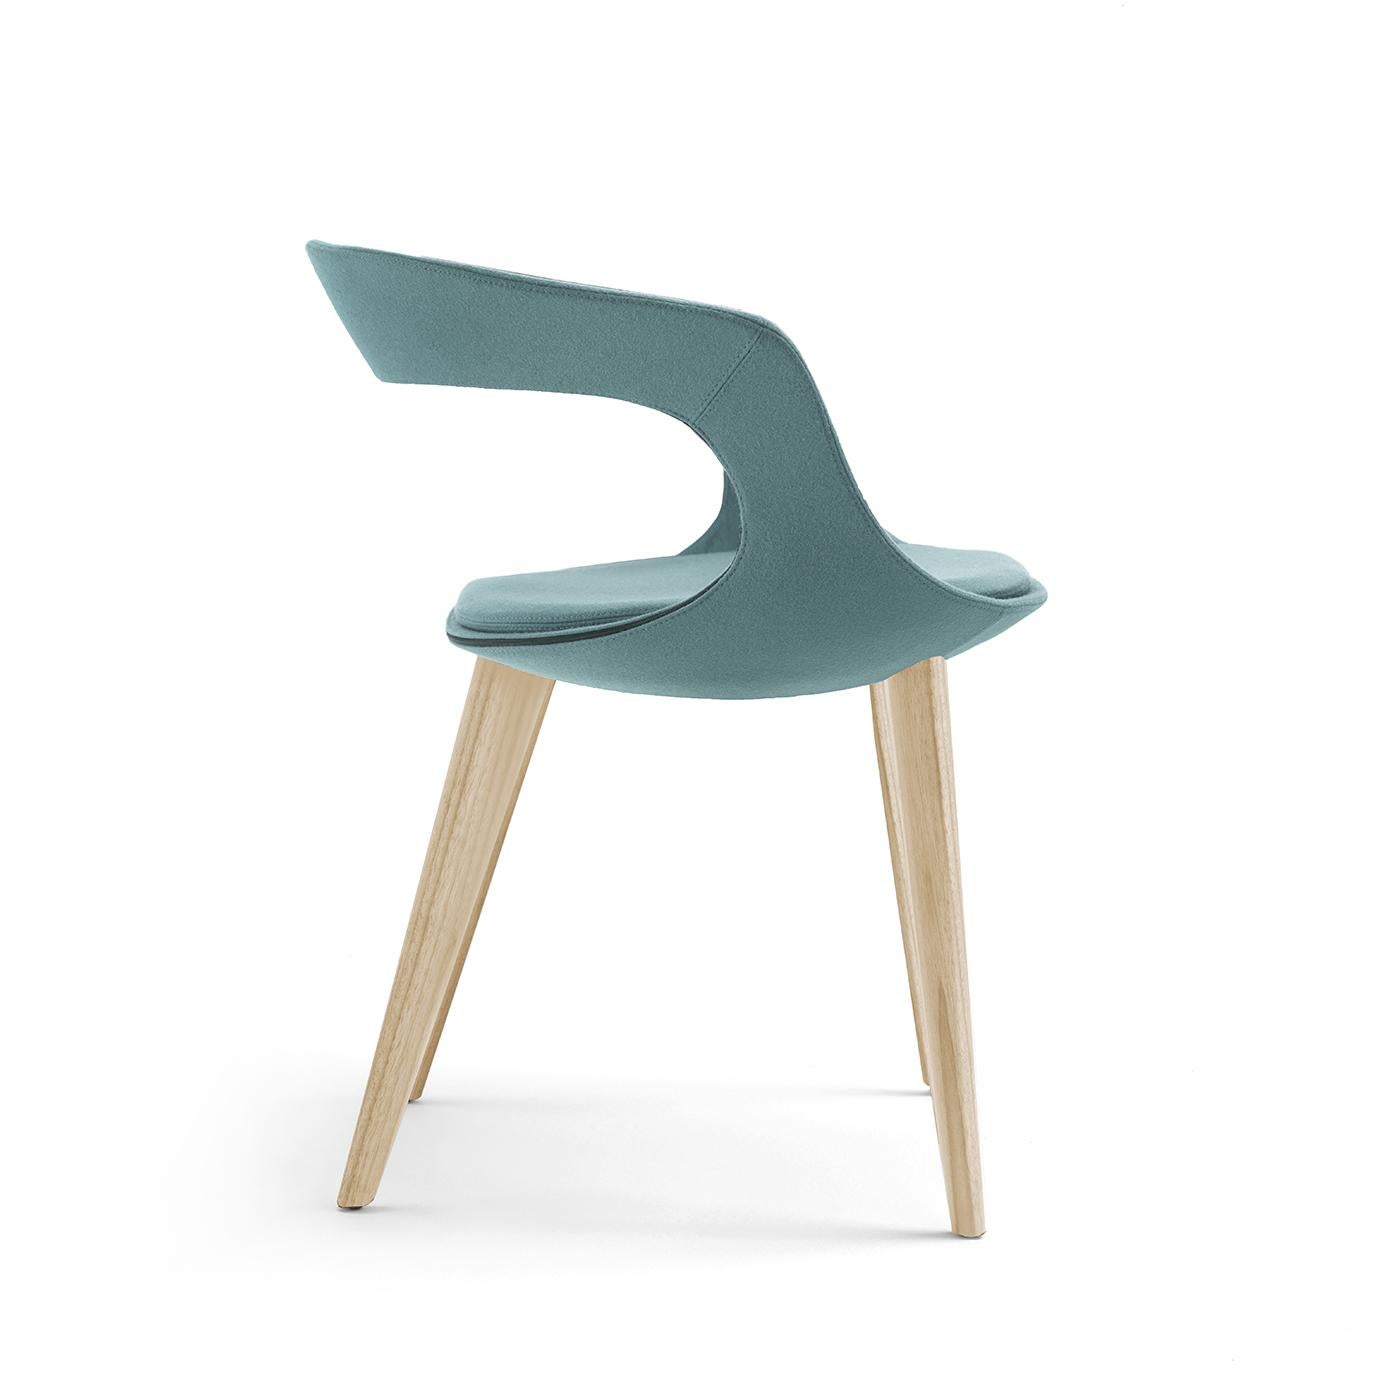 This inviting, attractive chair stands out for being elegant and comfortable at the same time. Its base is composed of four wooden legs in natural ash and features a steel shell covered in Brighton-colored felt with polyurethane foam padding. Other